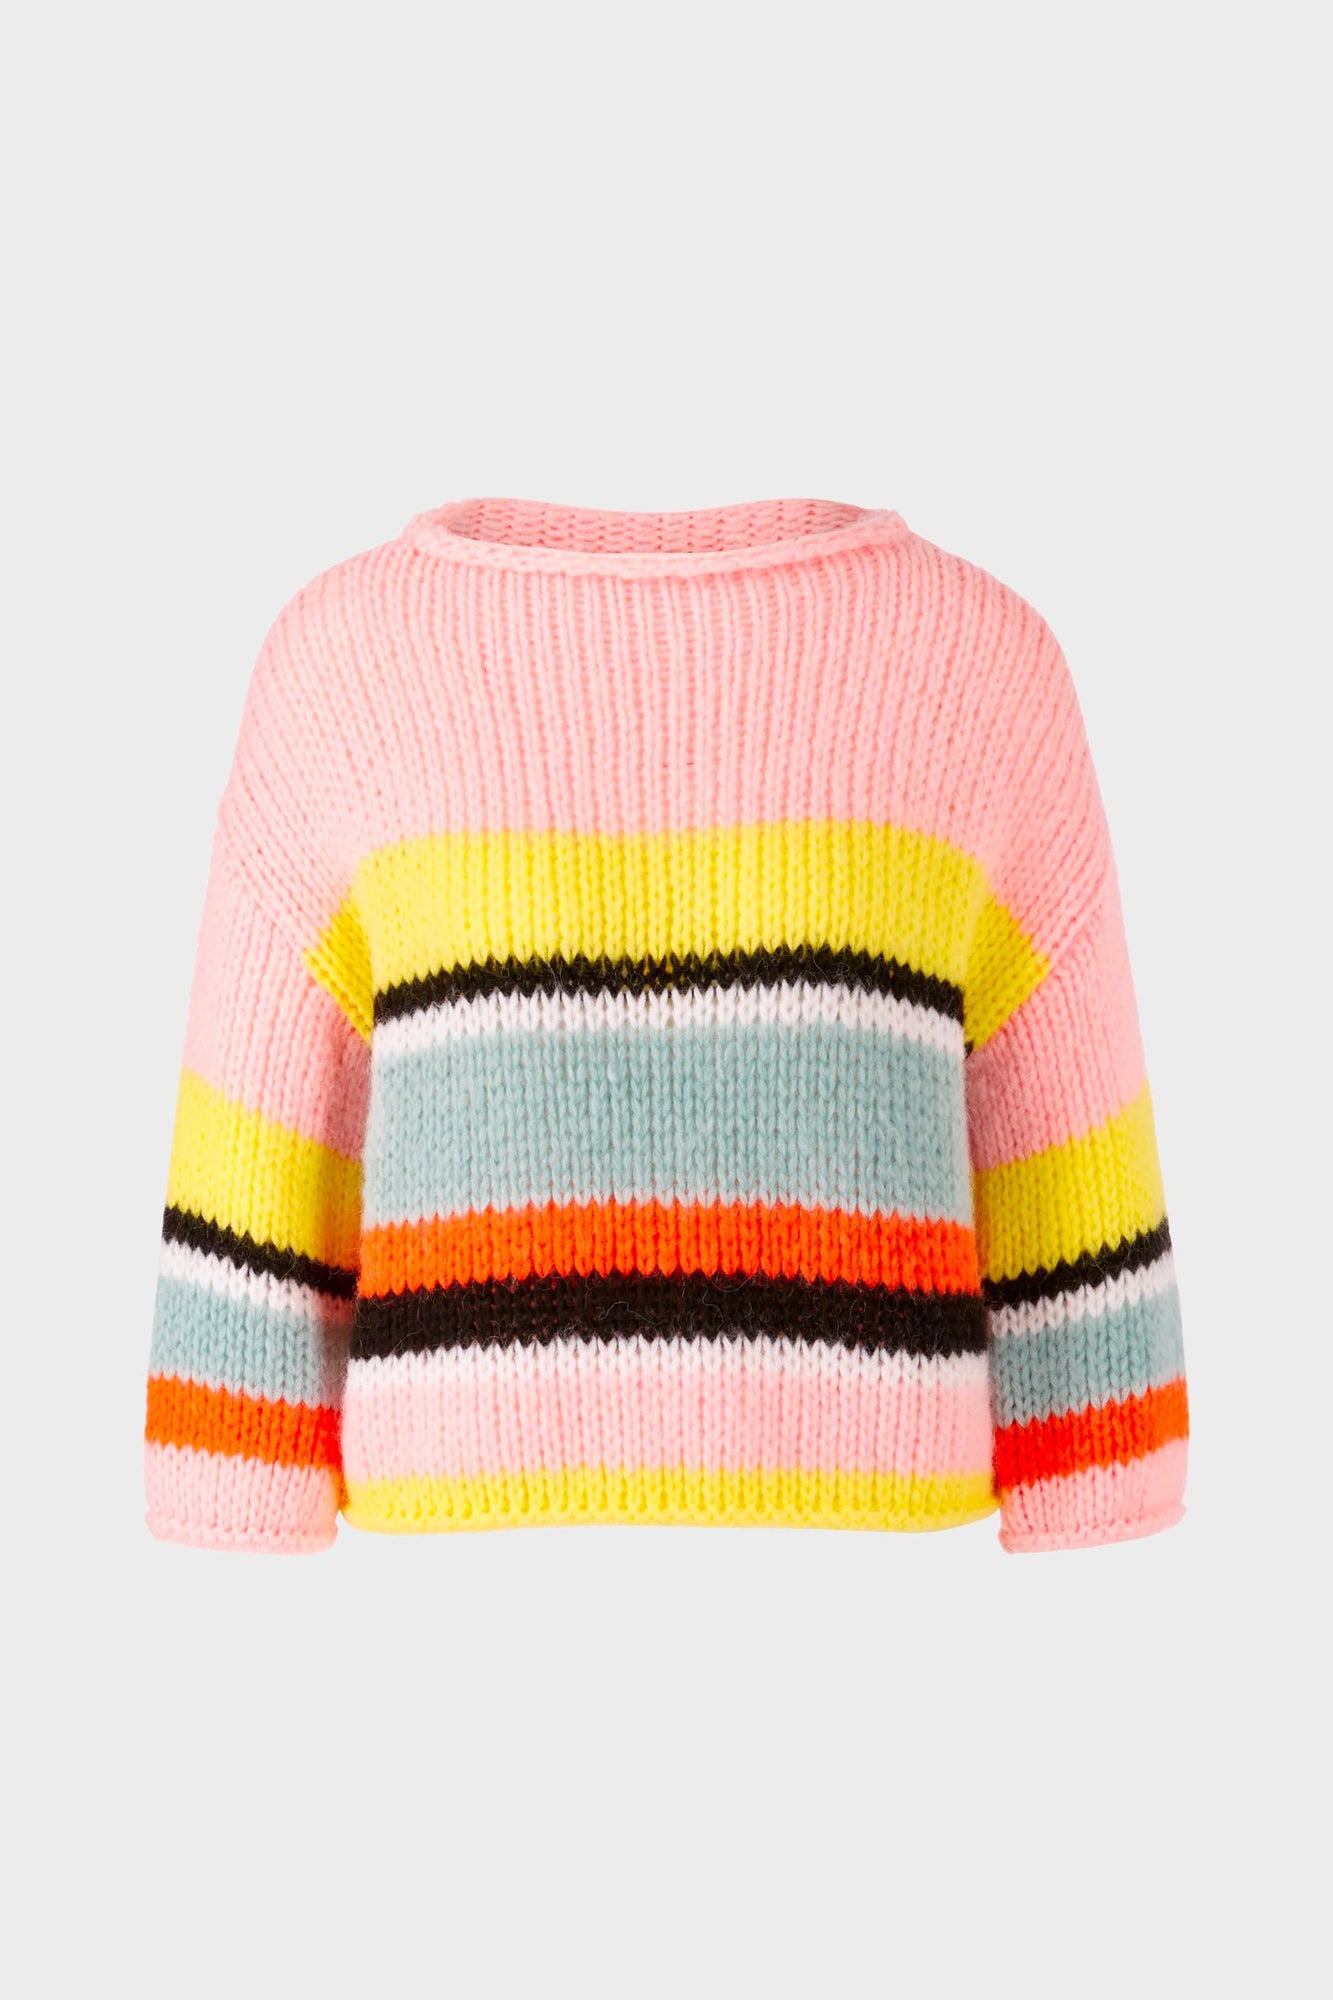 This stylish Happy Chirp Striped Sweater features a unique combination of cotton, mohair, alpaca and wool for a light yet cozy feel